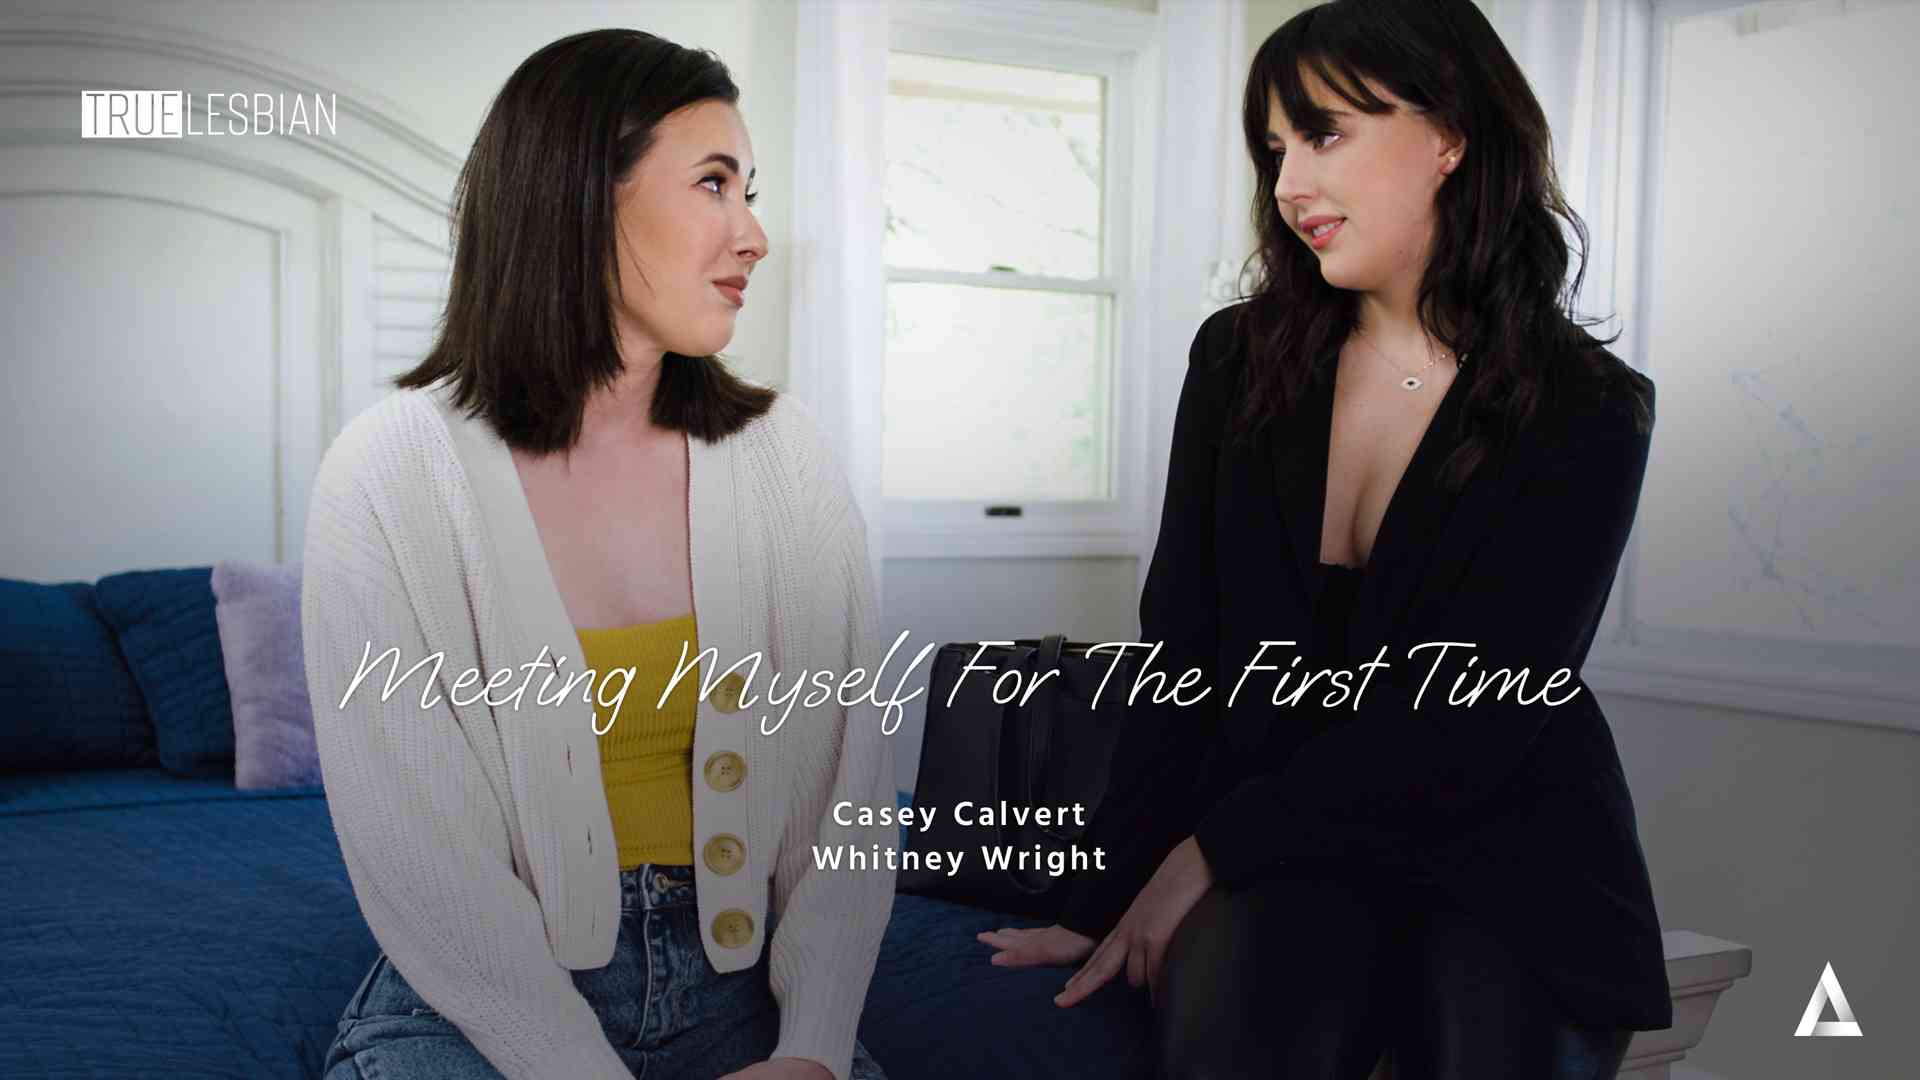 TrueLesbian &#8211; Casey Calvert And Whitney Wright &#8211; Meeting Myself For The First Time, PervTube.net